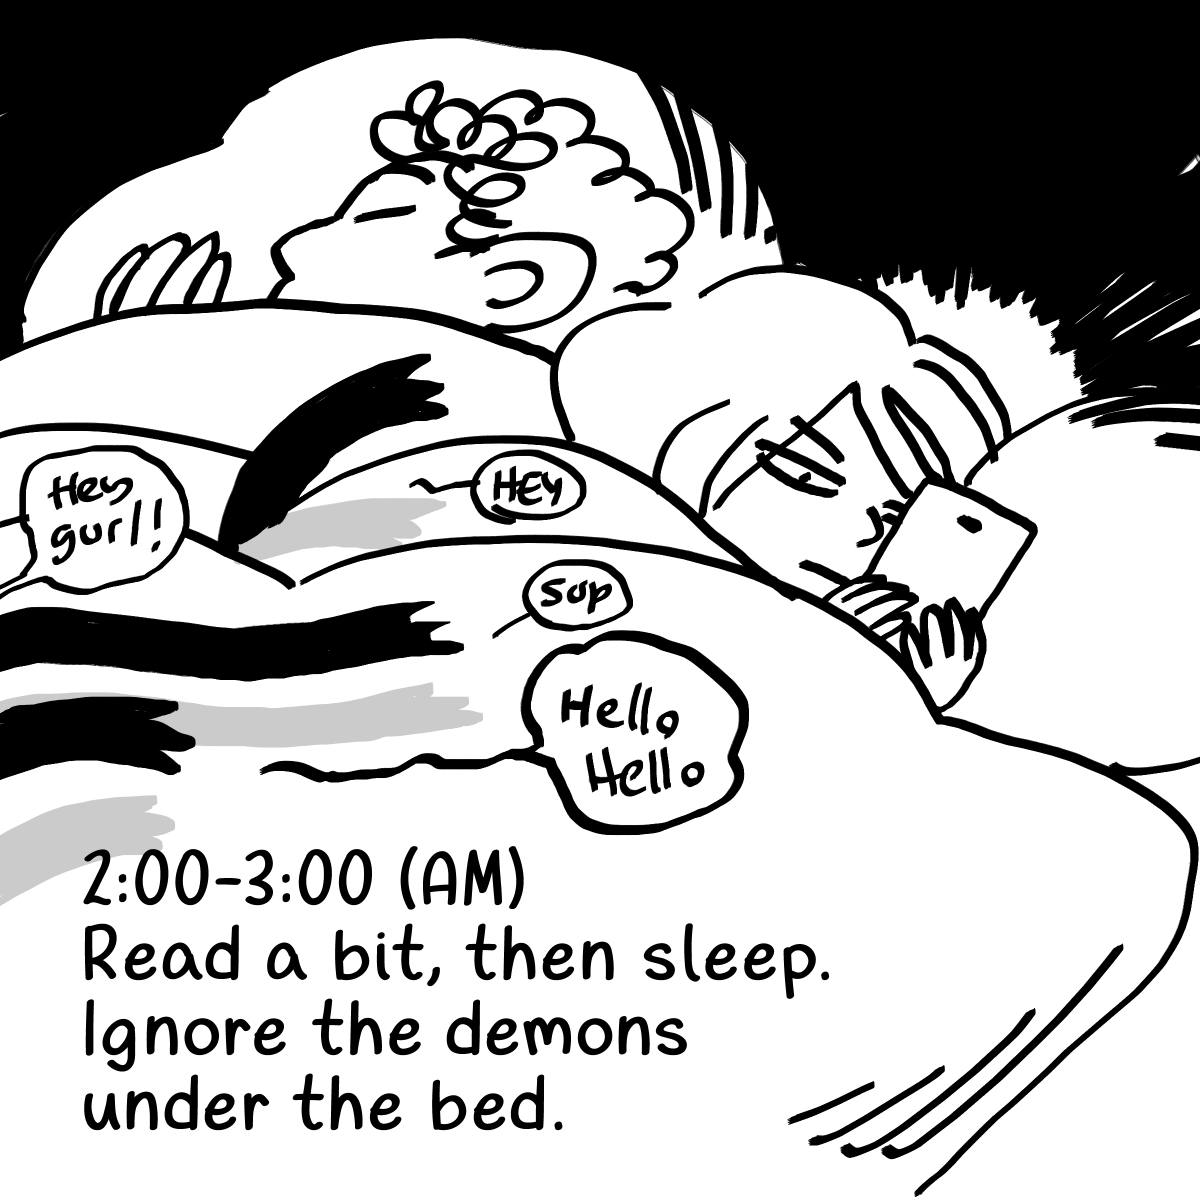 It's time for some TIME.

#hourlycomicday #HourlyComicDay2023 